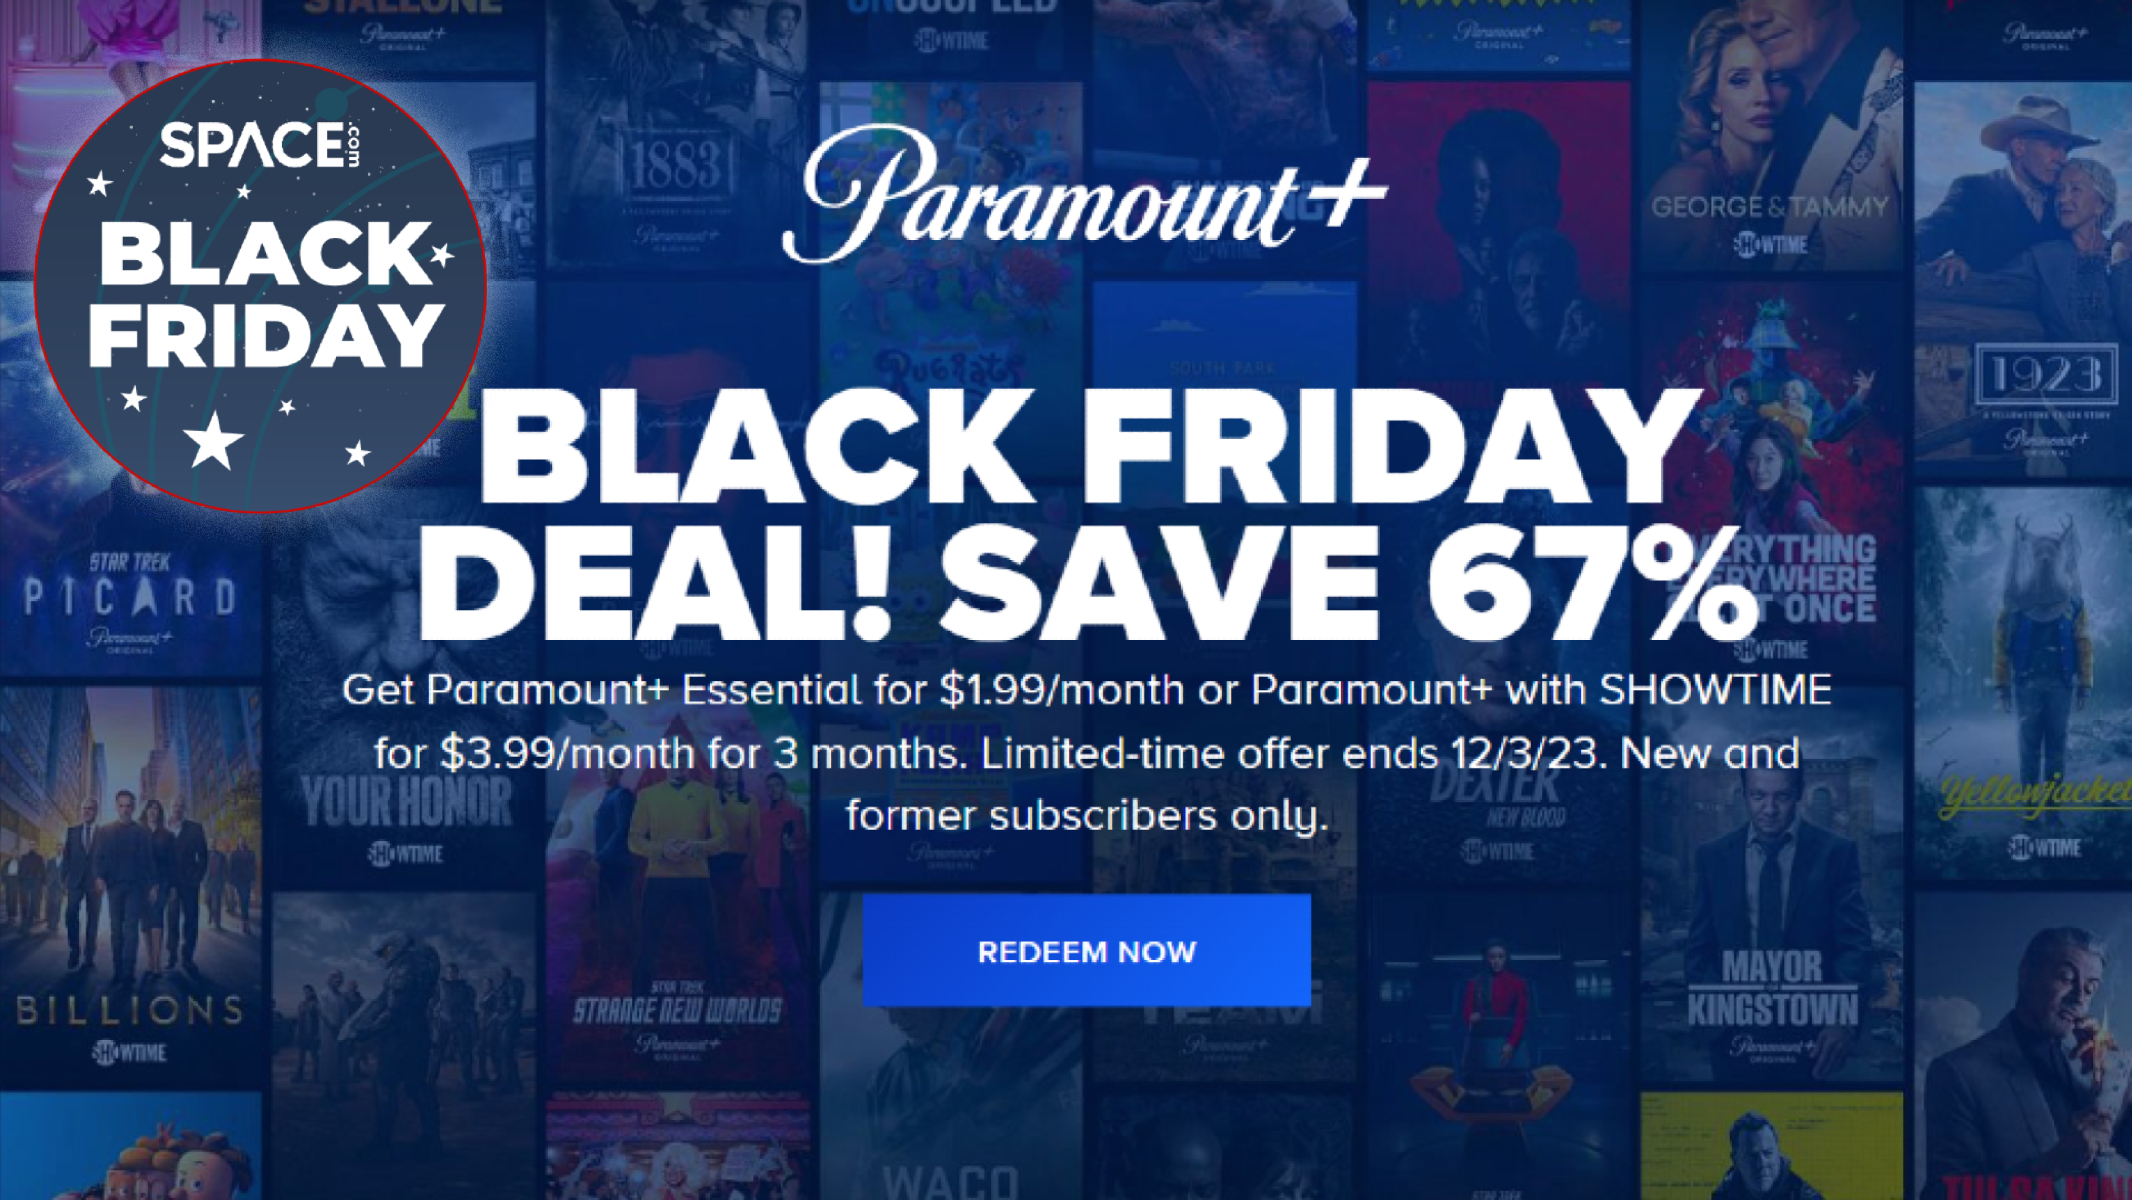 Watch all the Star Trek you want and save 67% on 3 months of Paramount Plus in this early Black Friday deal Space